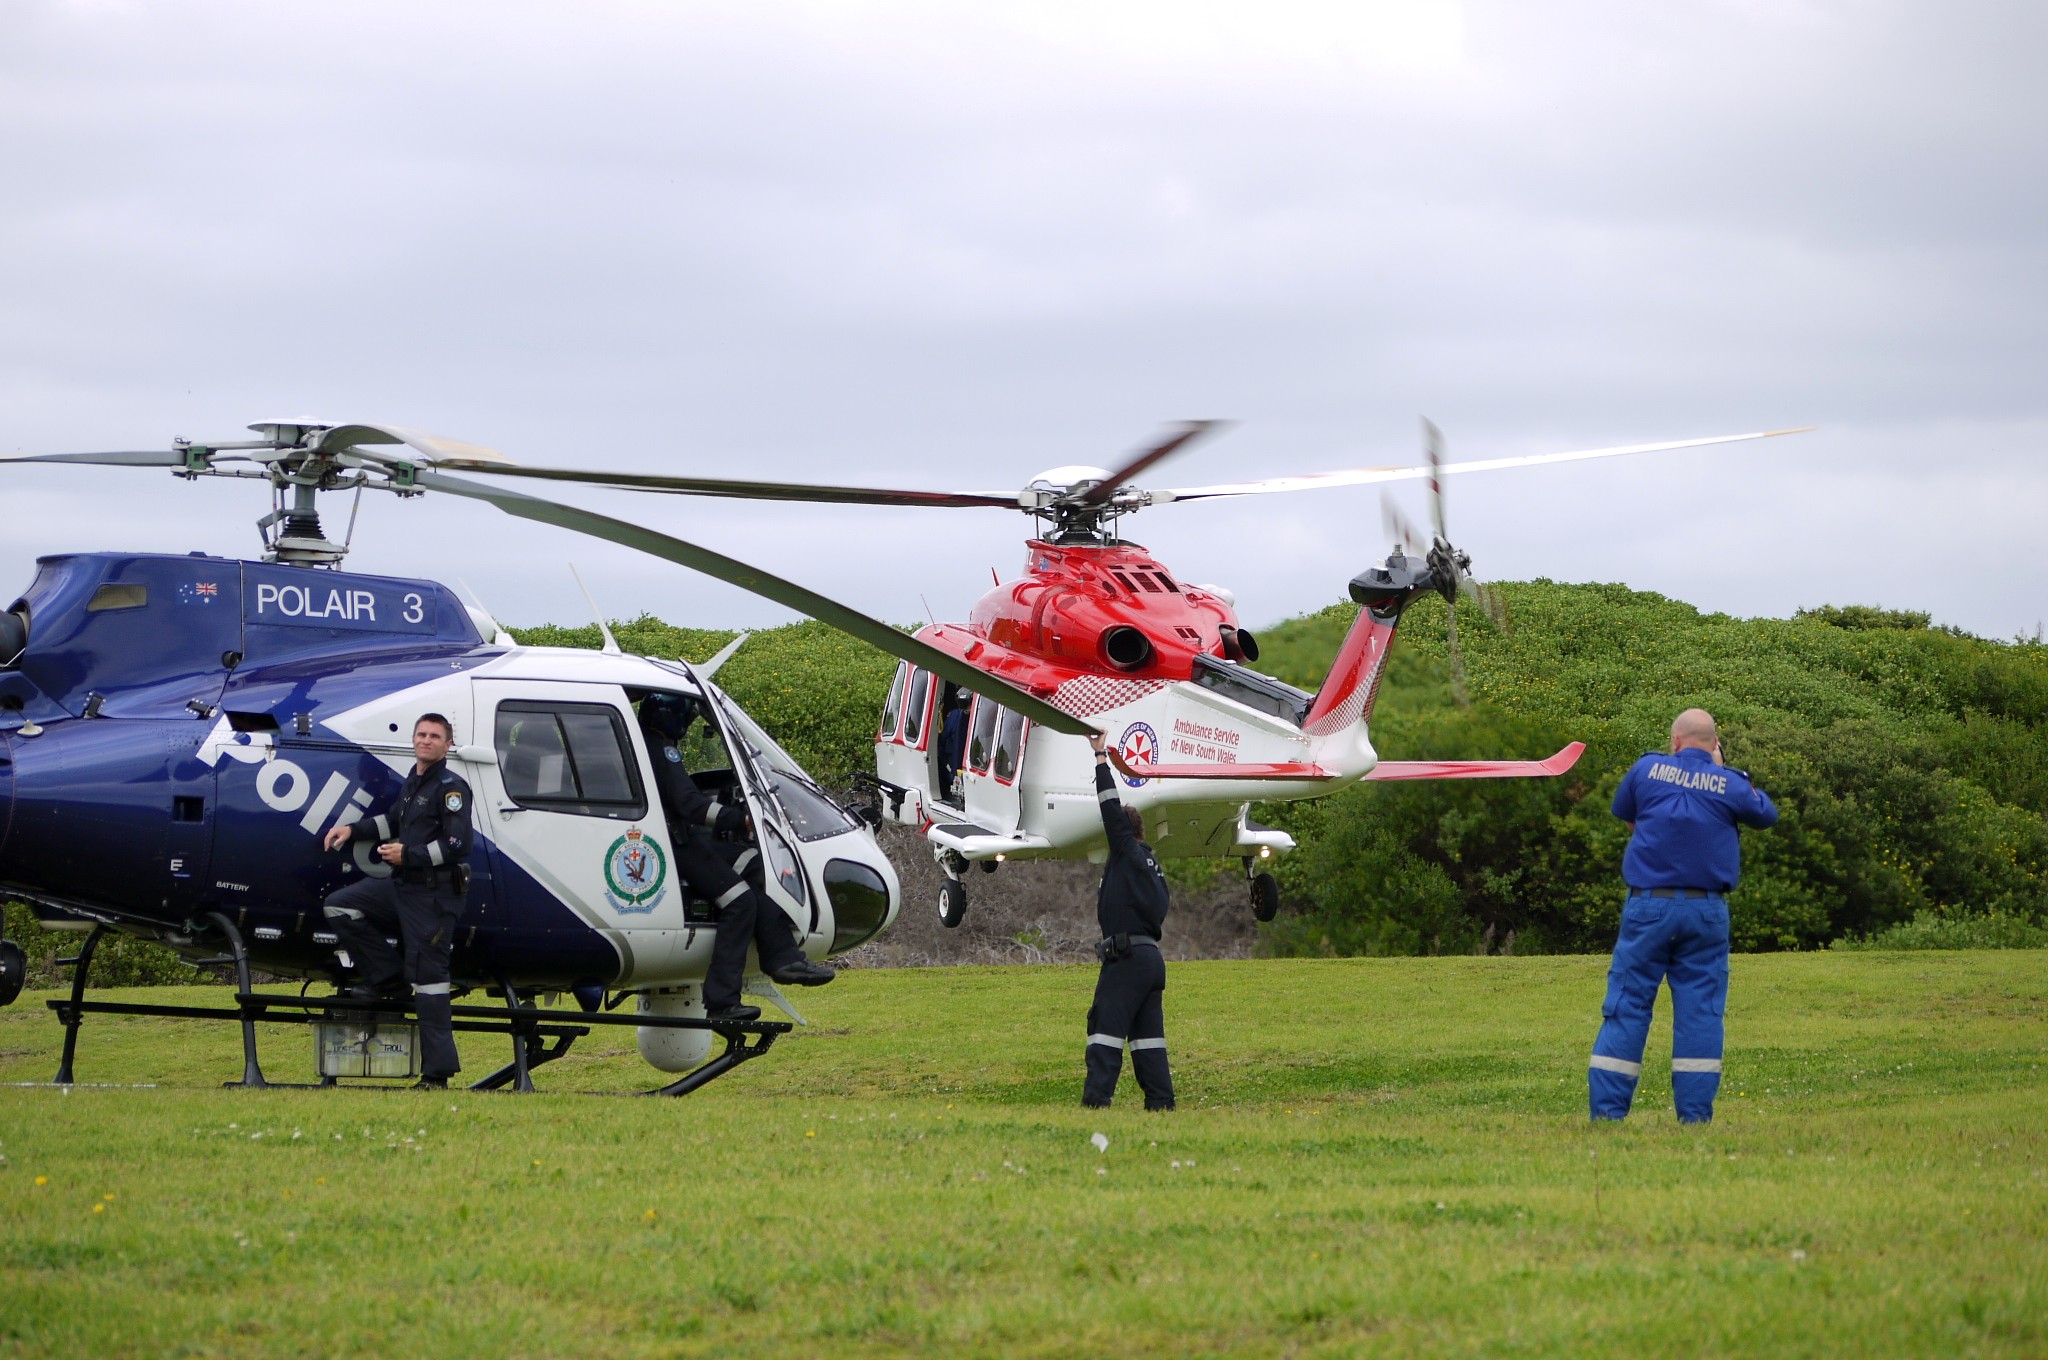 POLAIR 3 and ASNSW AW139 Rescue helicopter - Flickr - Highway Patrol Images